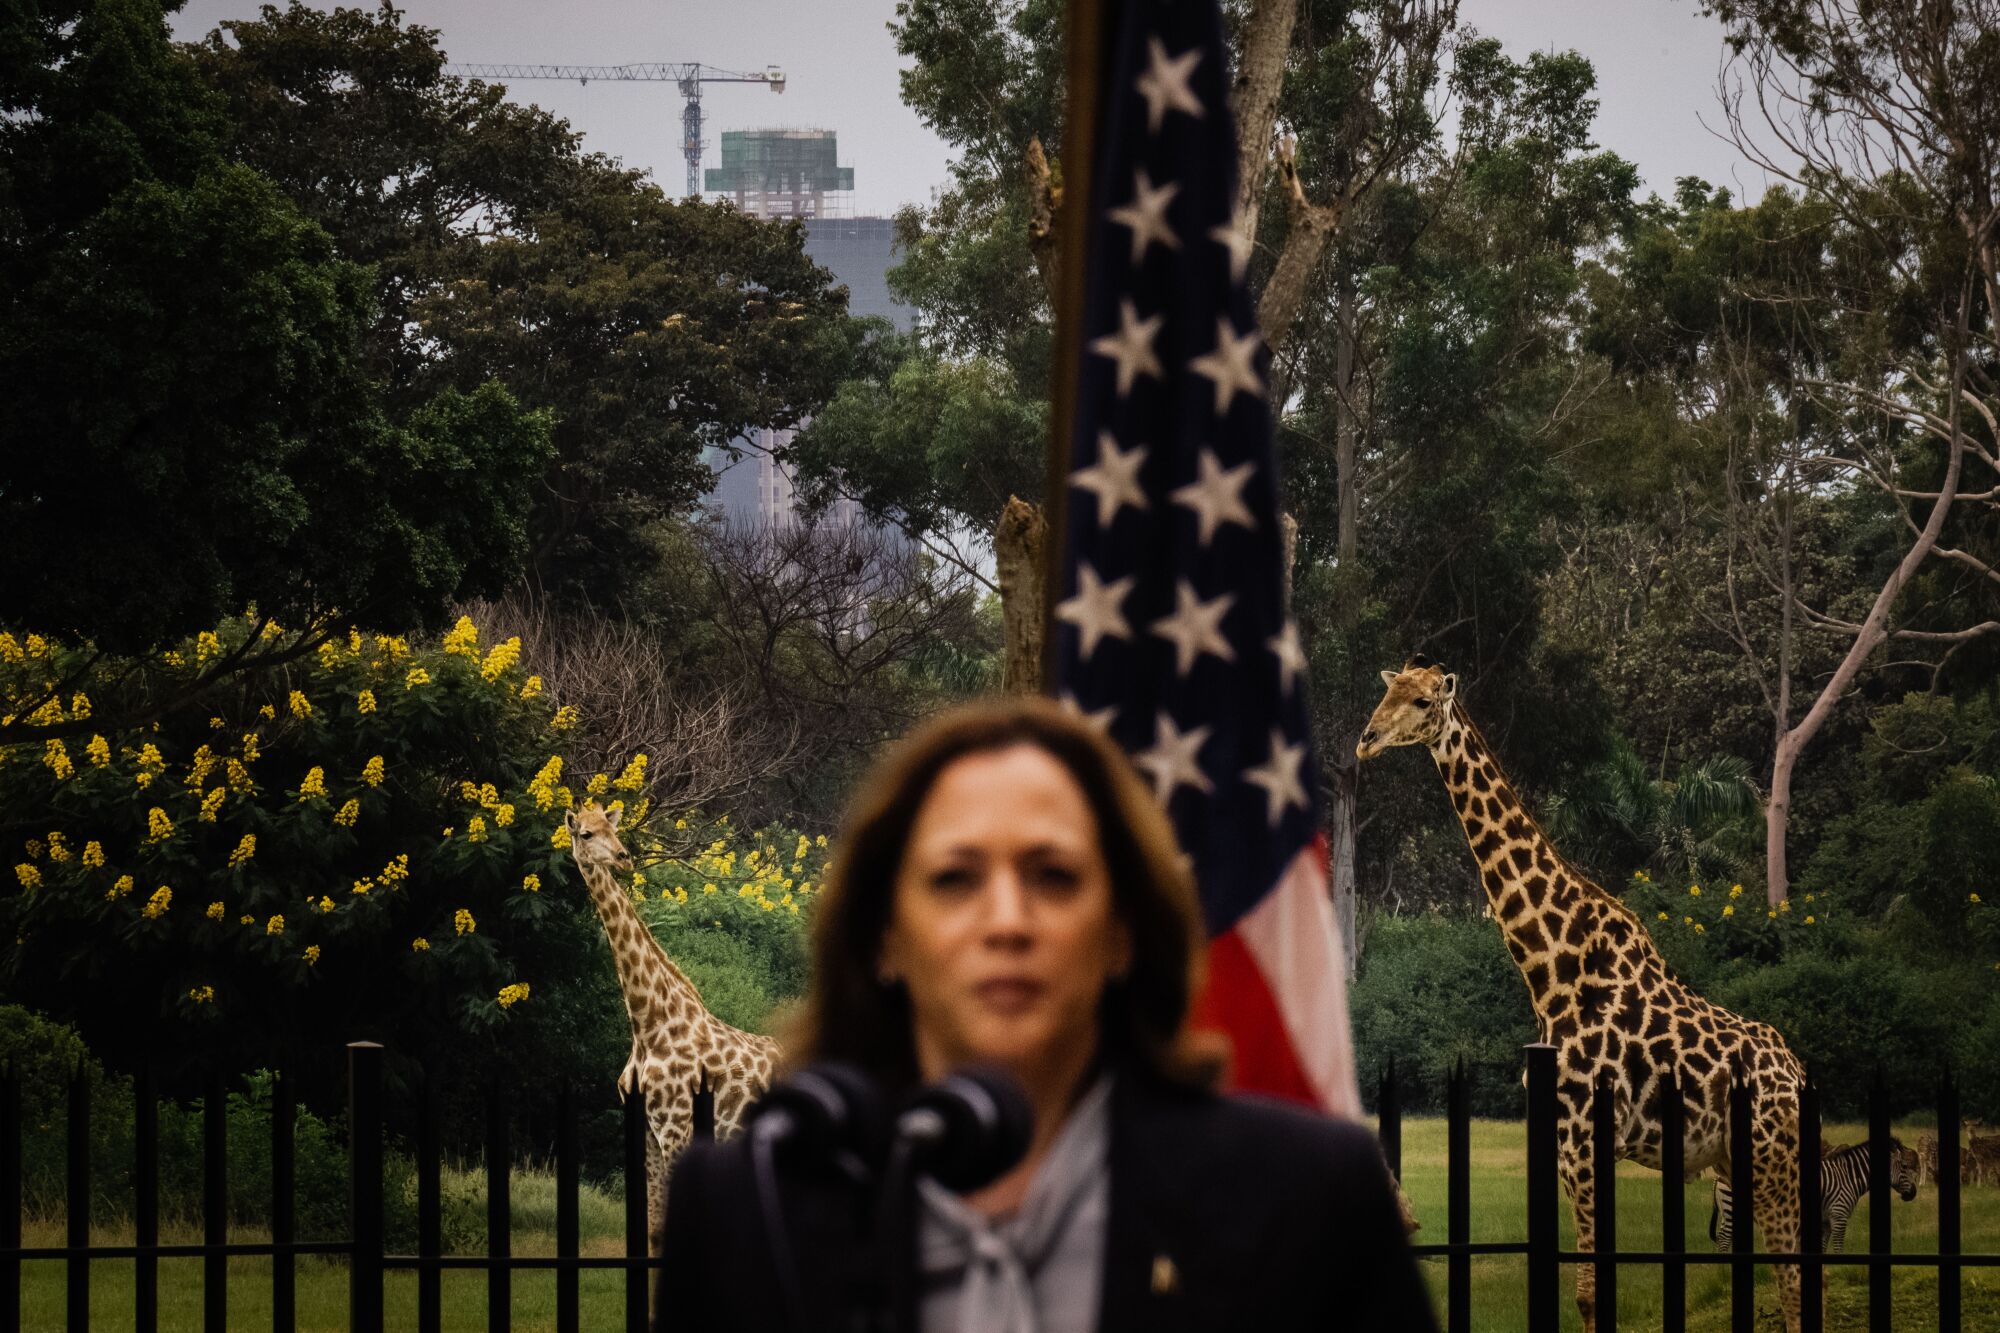 Giraffes are seen in the background as Vice President Kamala Harris holds a press conference.